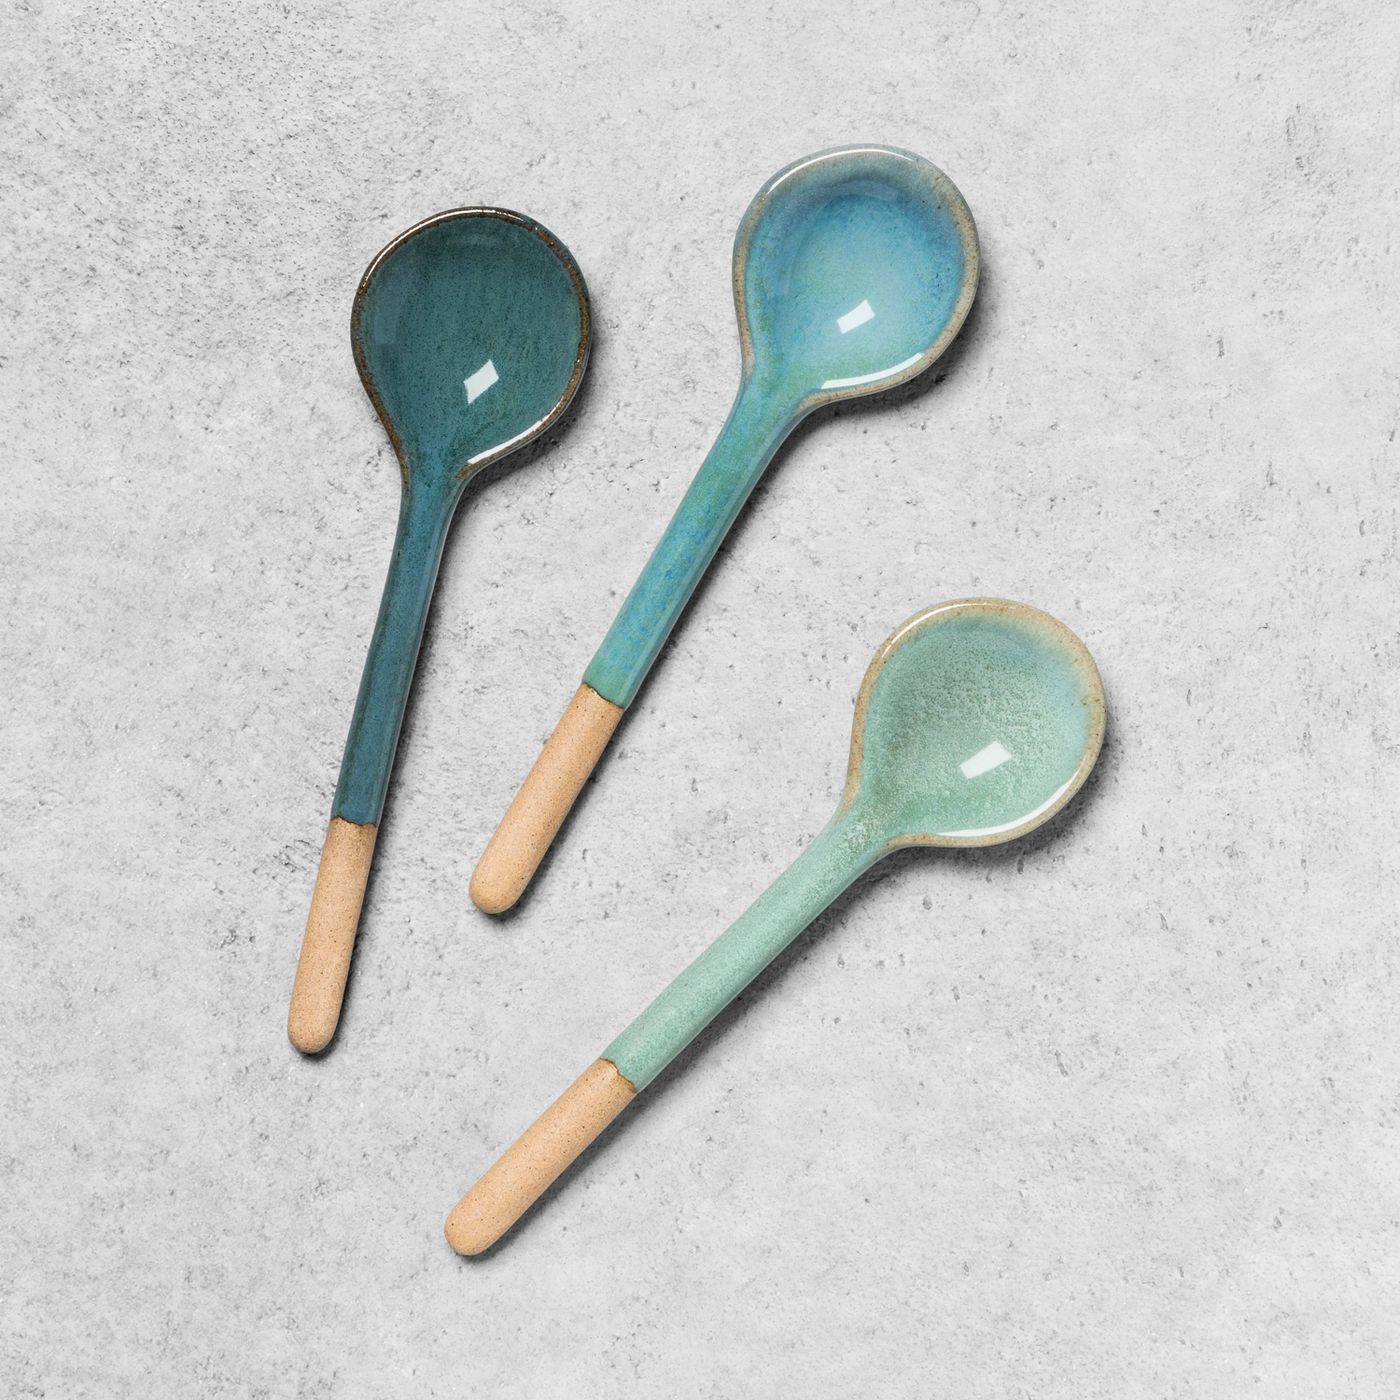 A-trio-of-spoons-in-blues-and-greens-11554